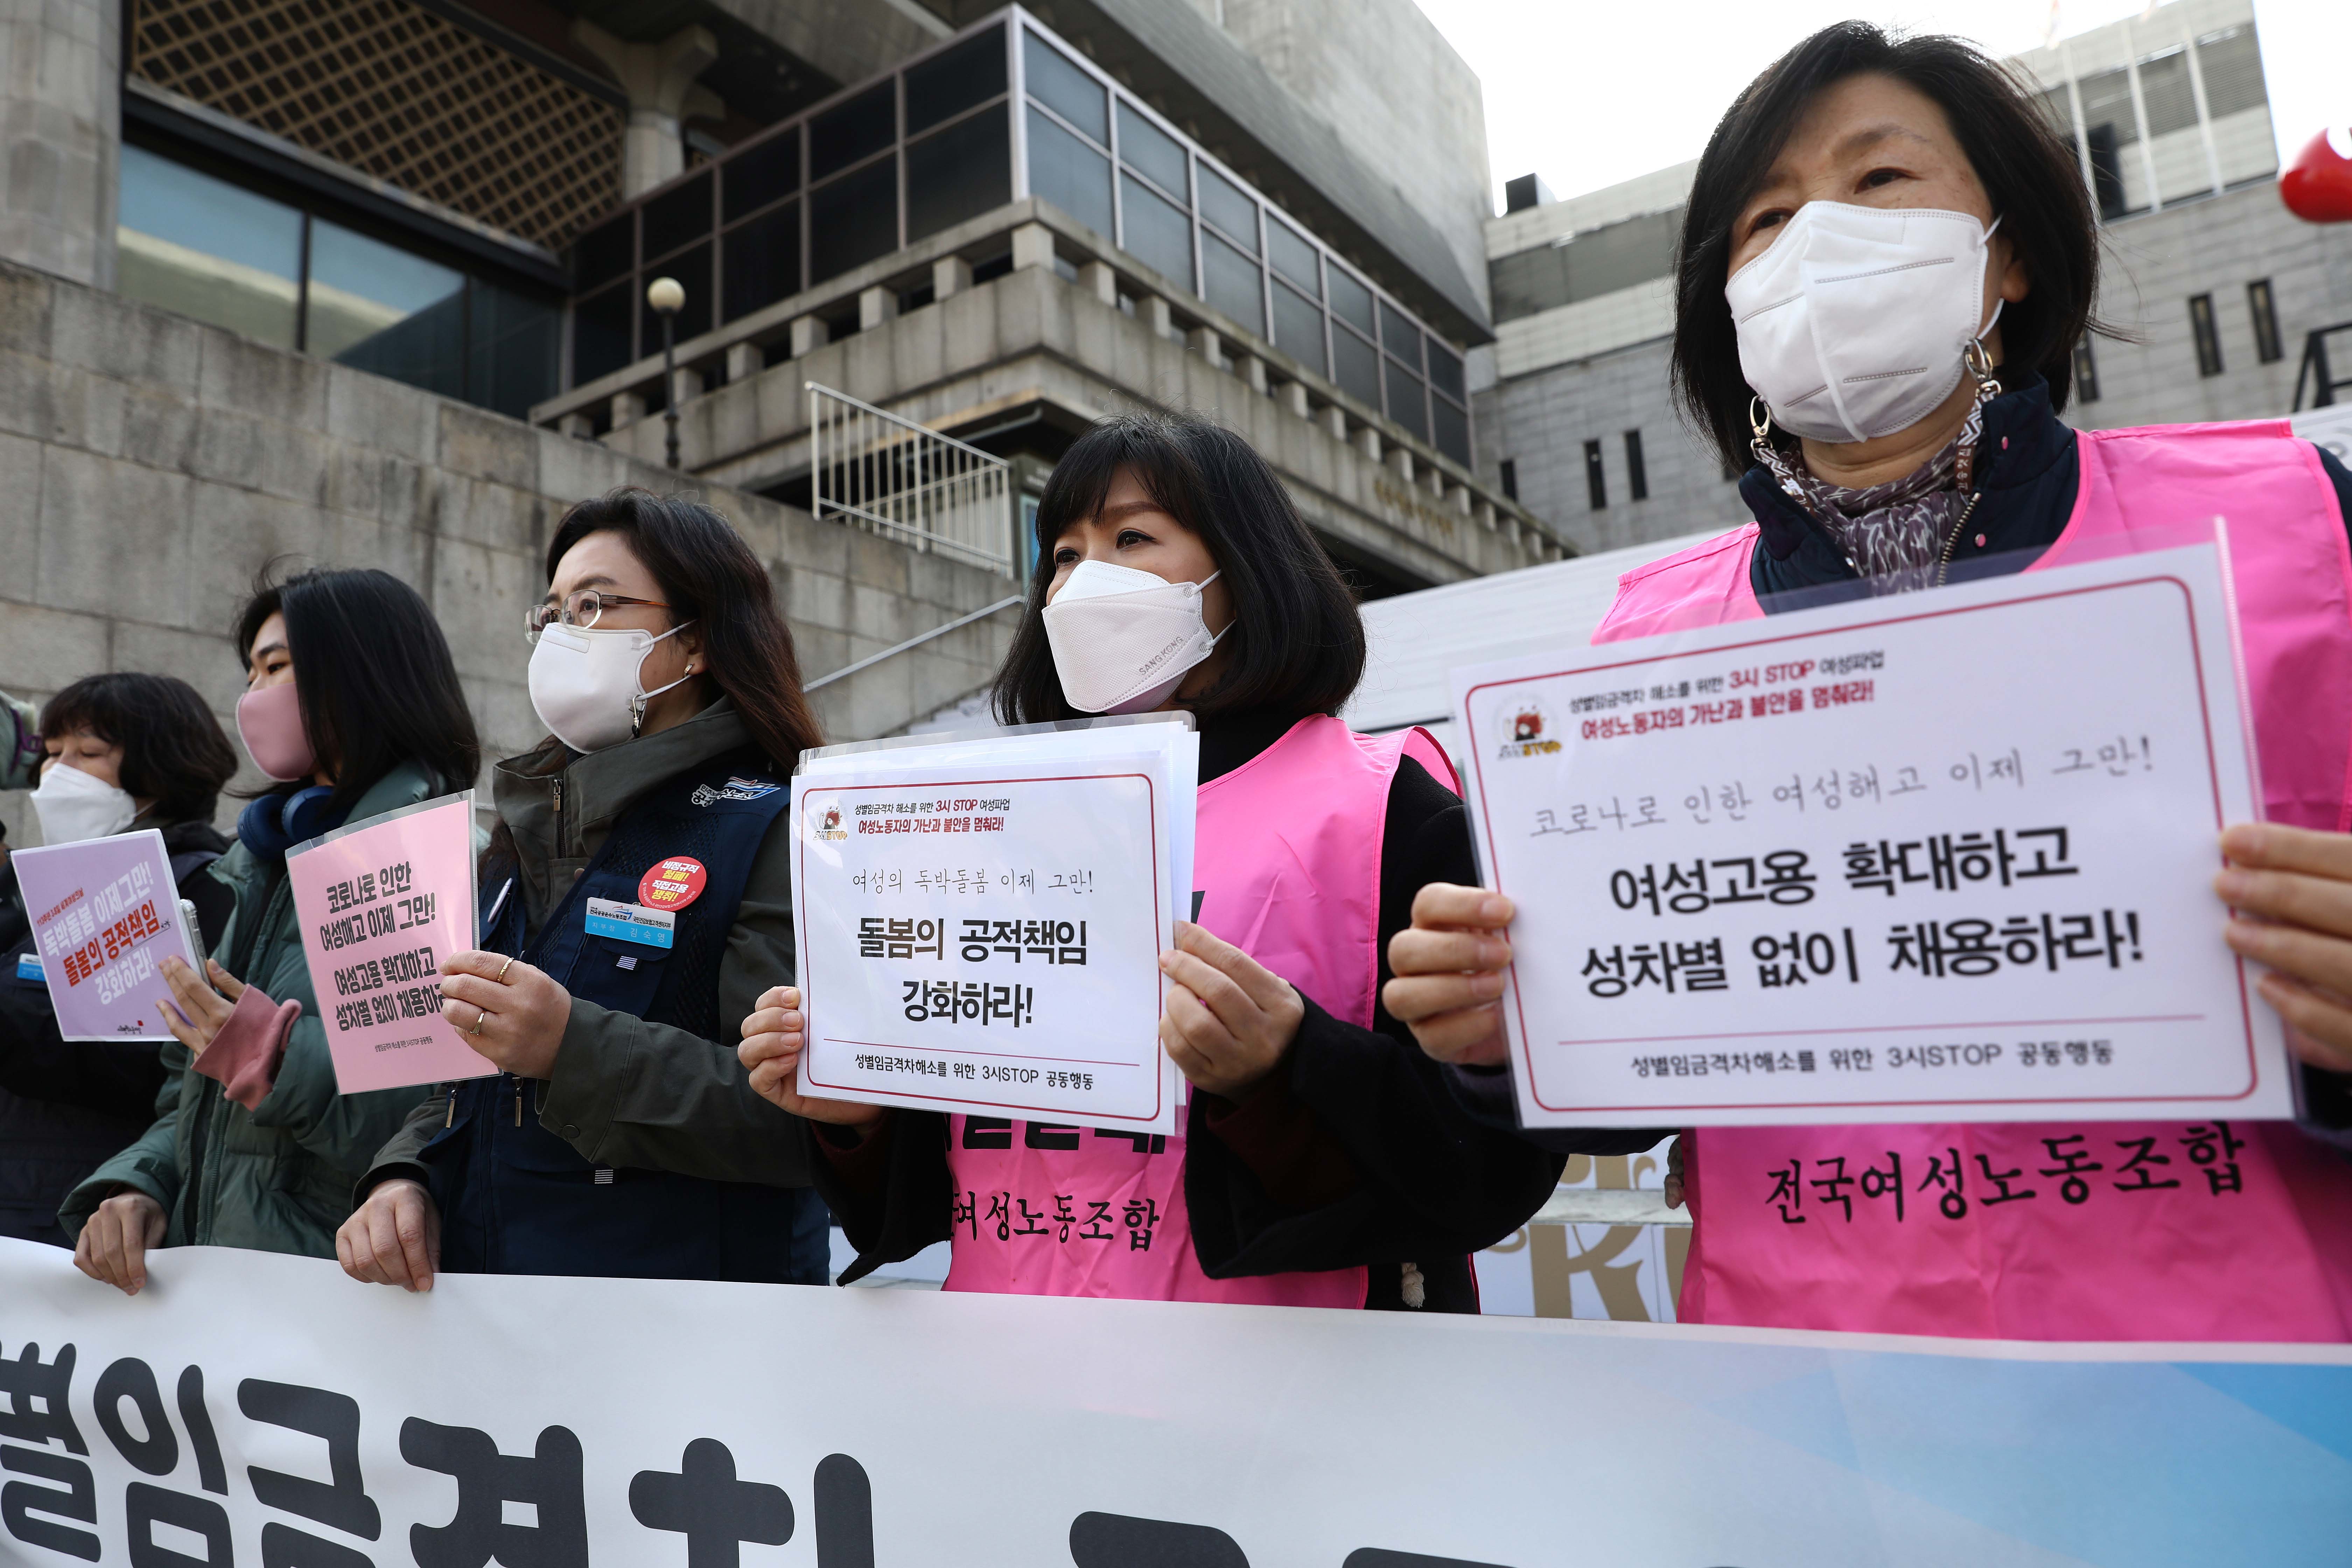 South Korea: Backtracking on Rights Protections